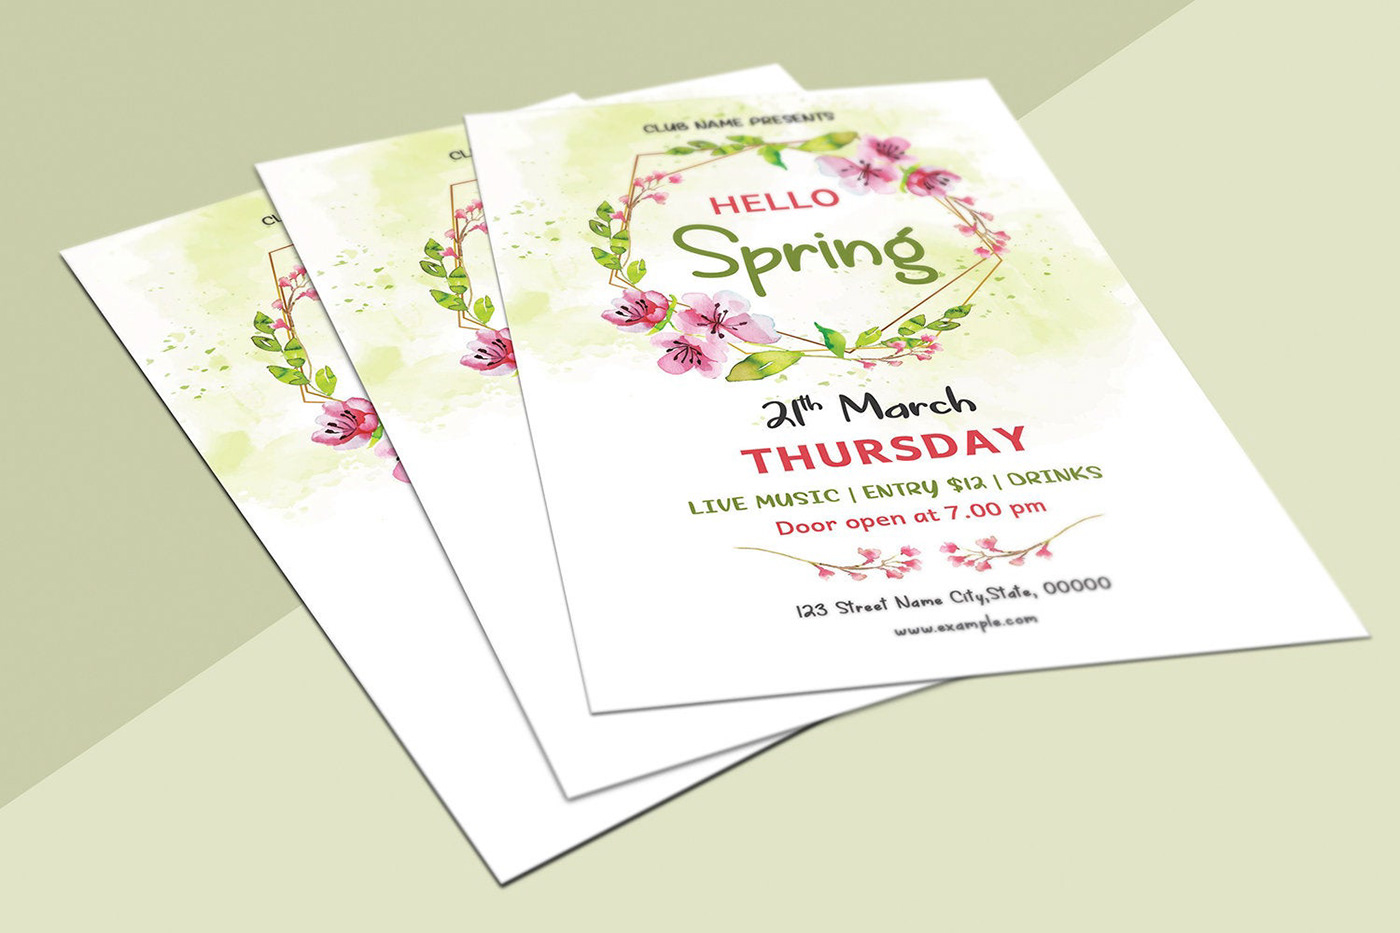 festival Invitation Flyer ms word party flyer photoshop template spring bash spring festival Spring Festival Flyer Spring Party spring poster